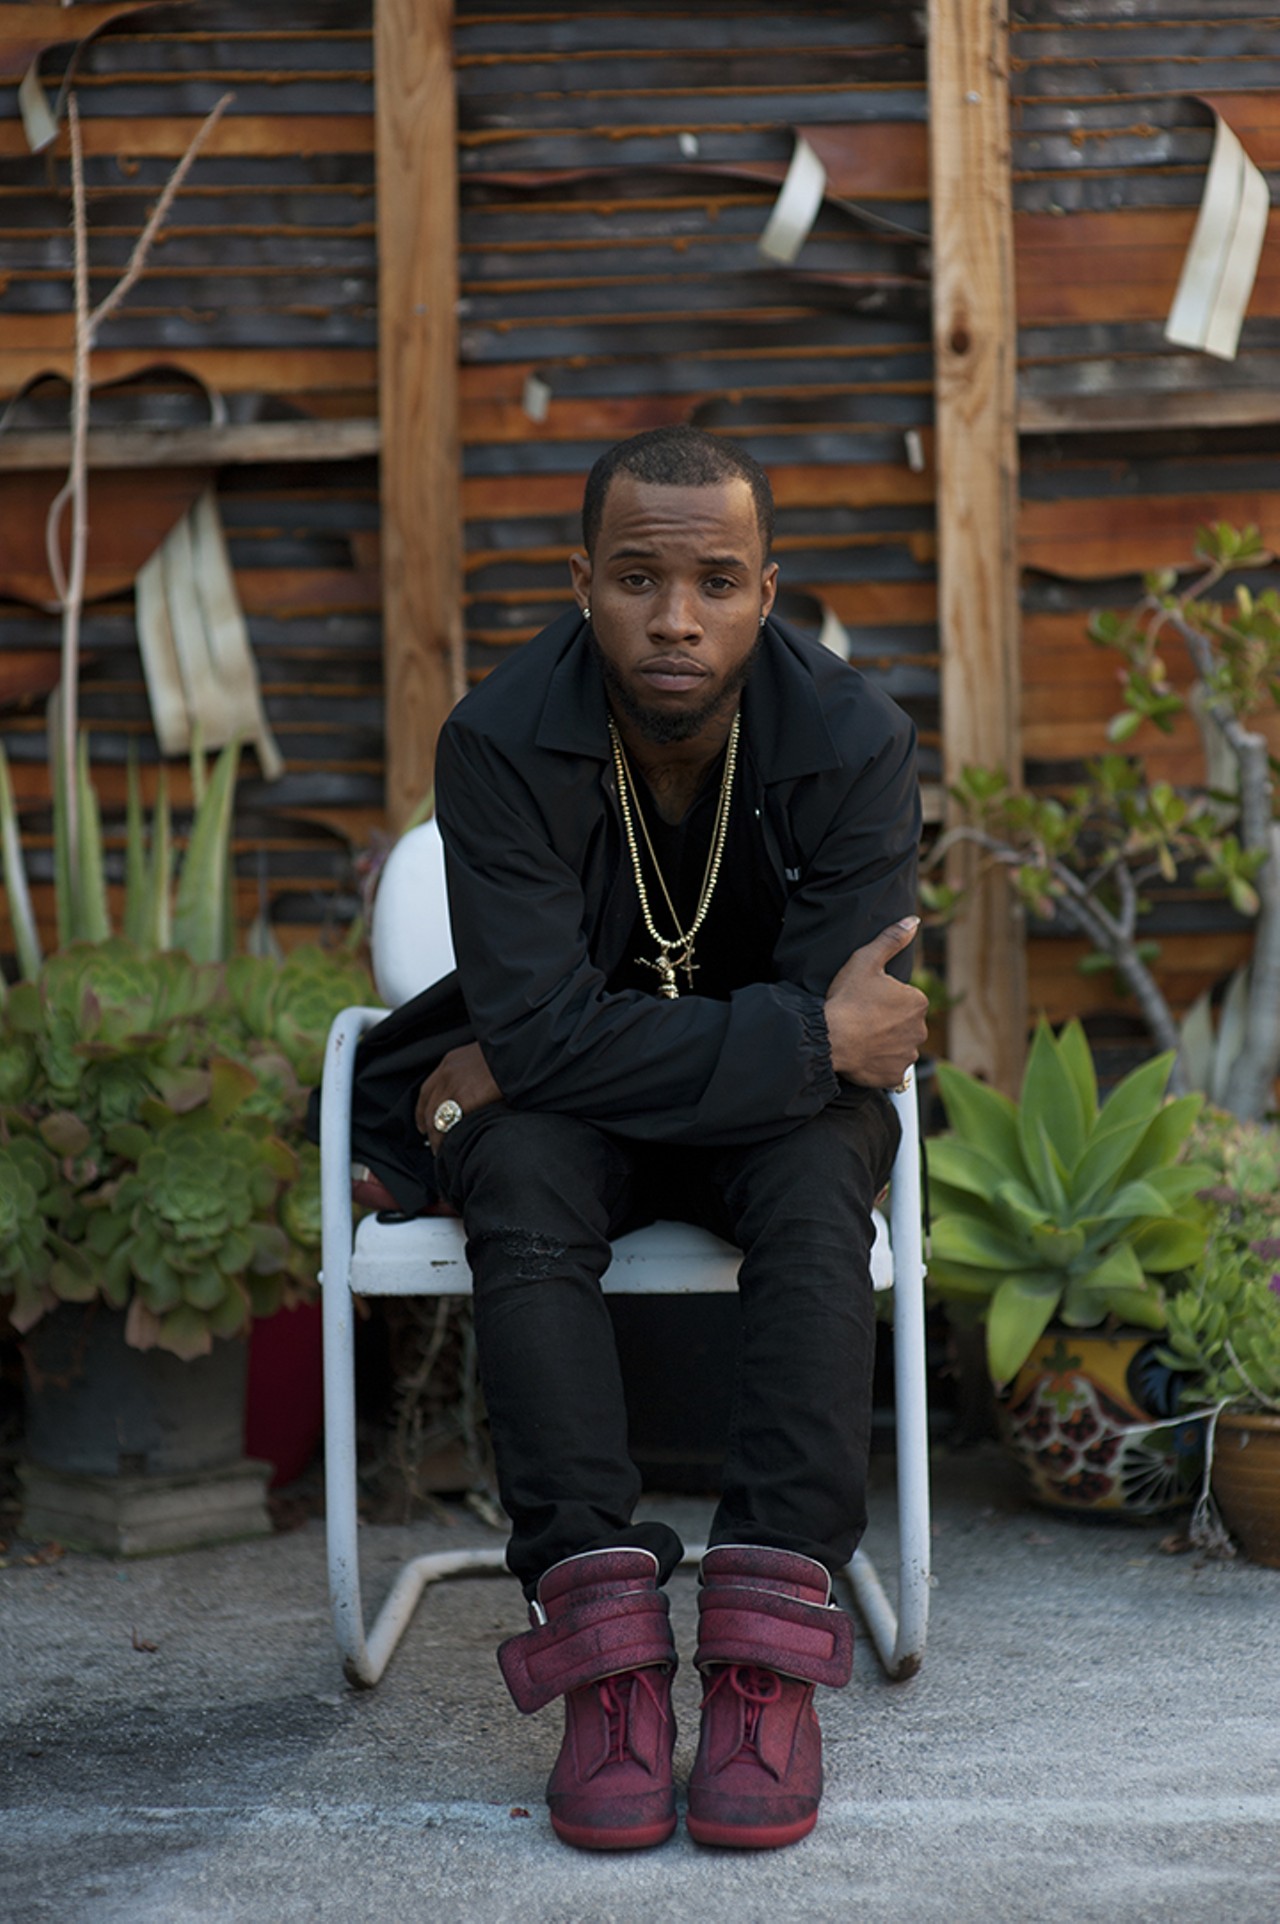 Saturday, Sept. 17Tory Lanez at the Plaza Live